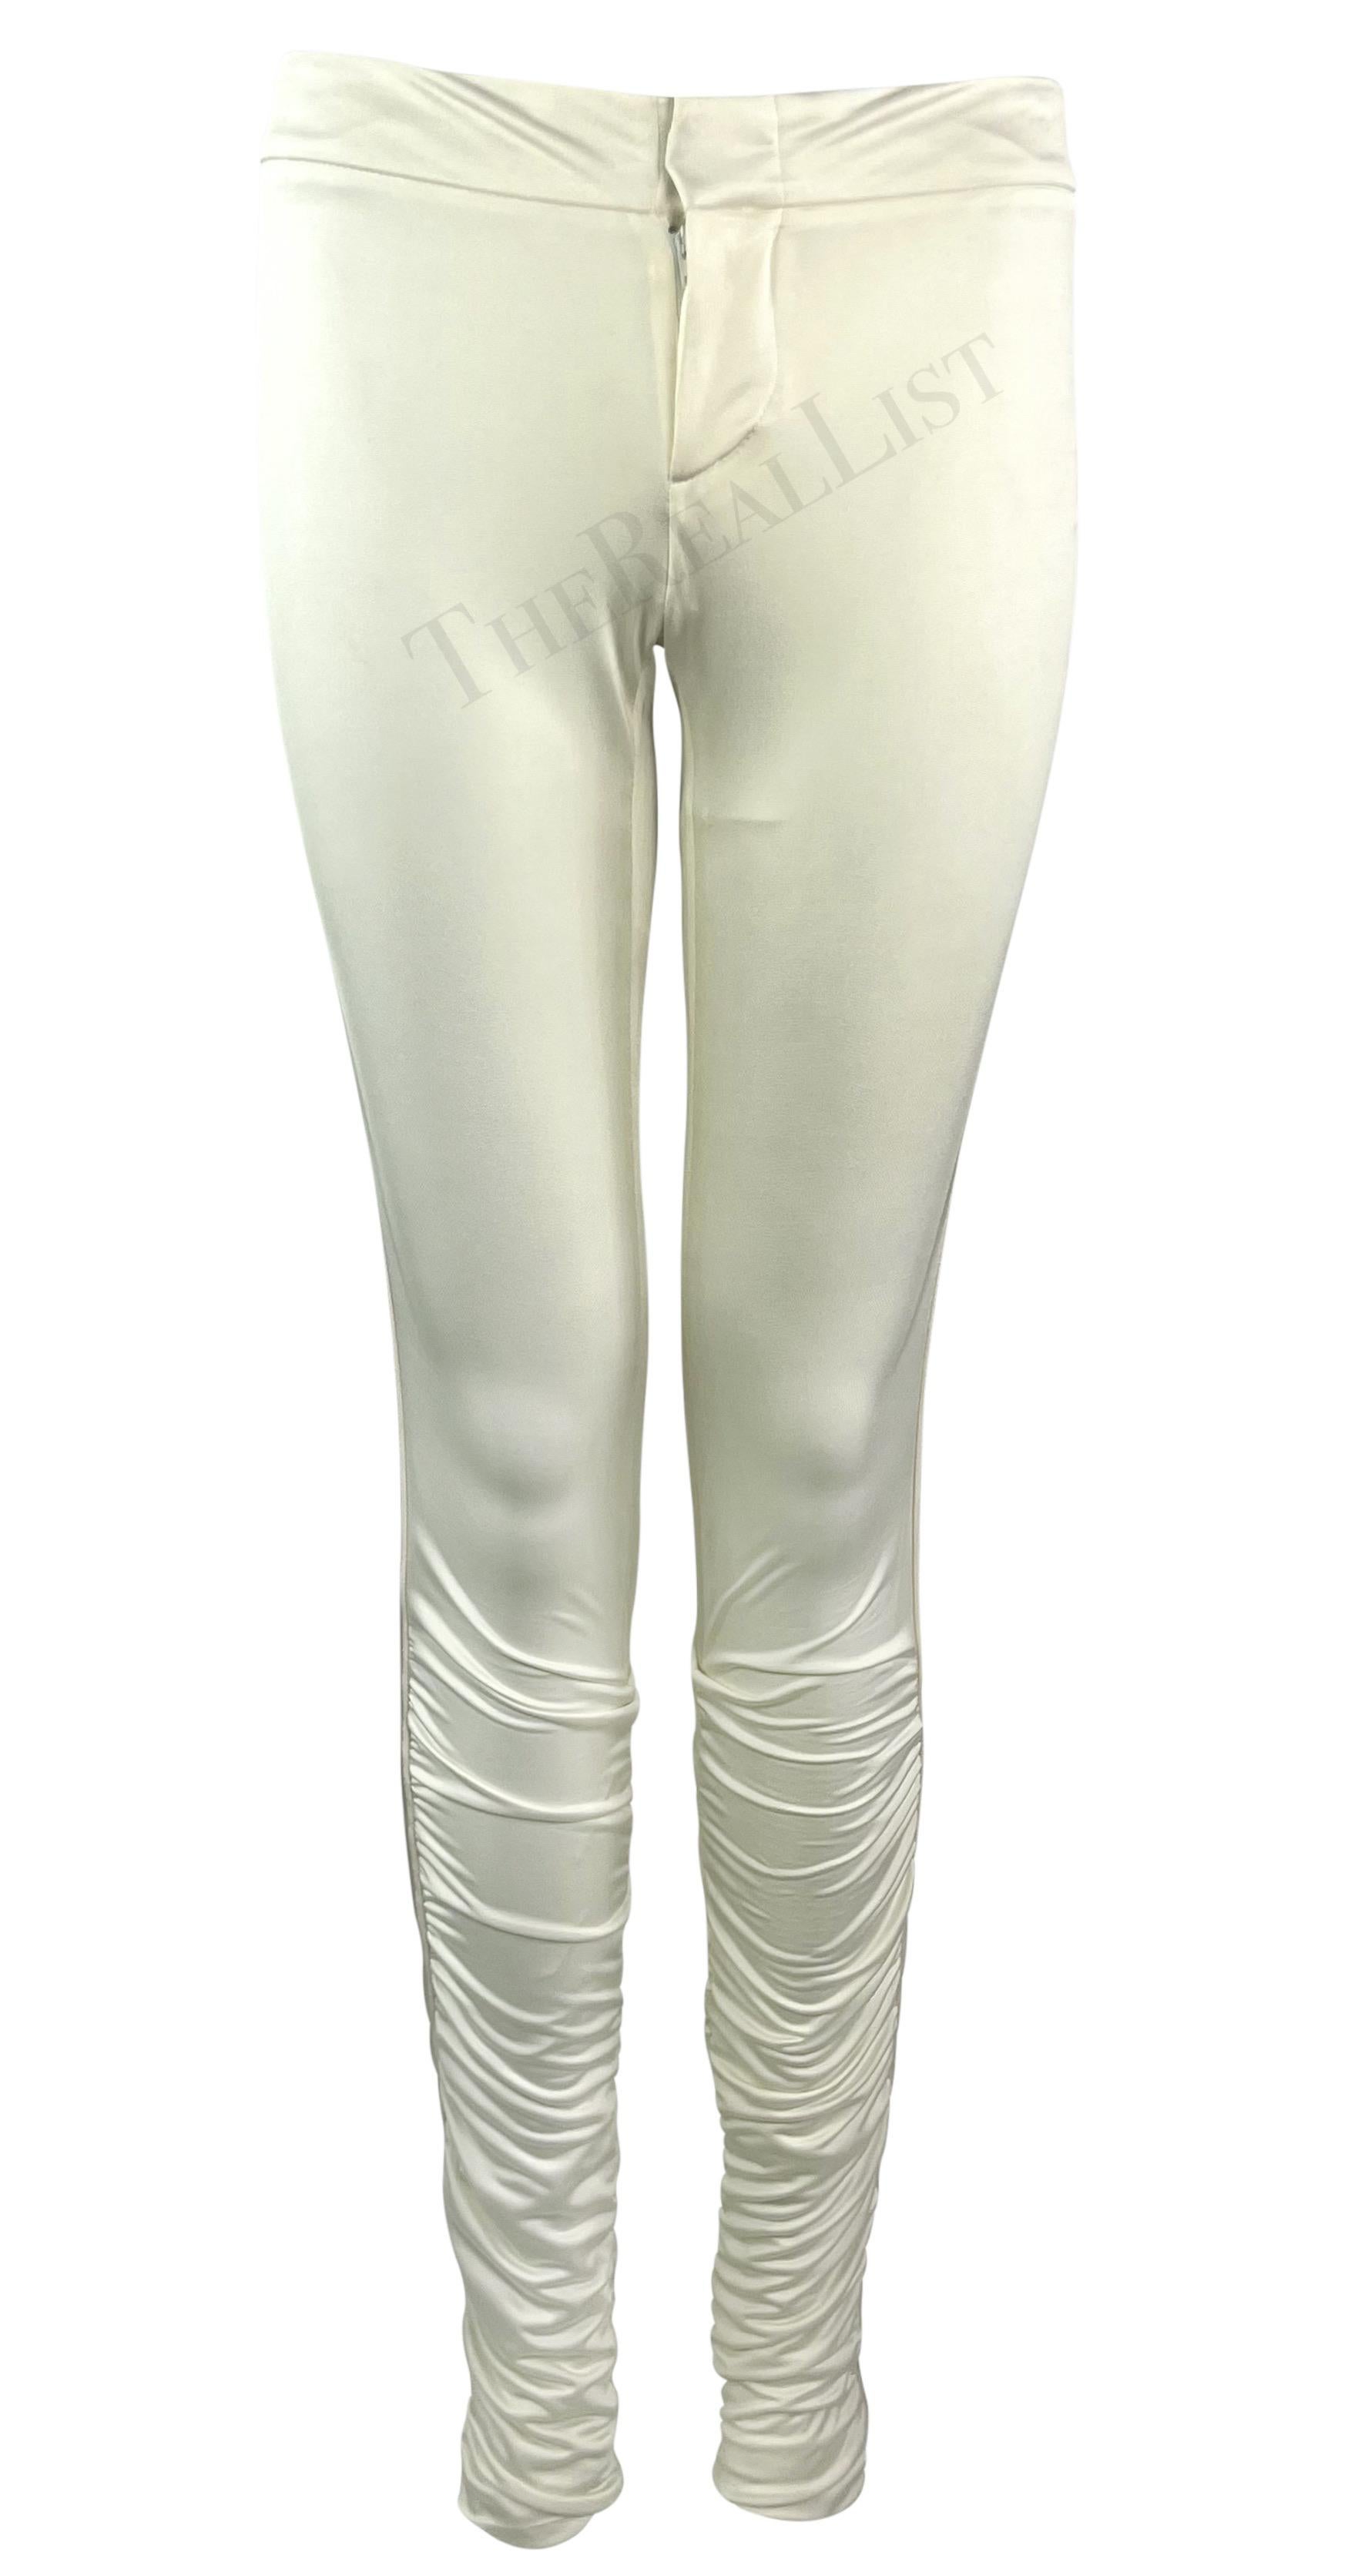 Women's NWT F/W 2004 Gucci by Tom Ford White Ruched Satin Ribbon Trimmed Pants For Sale